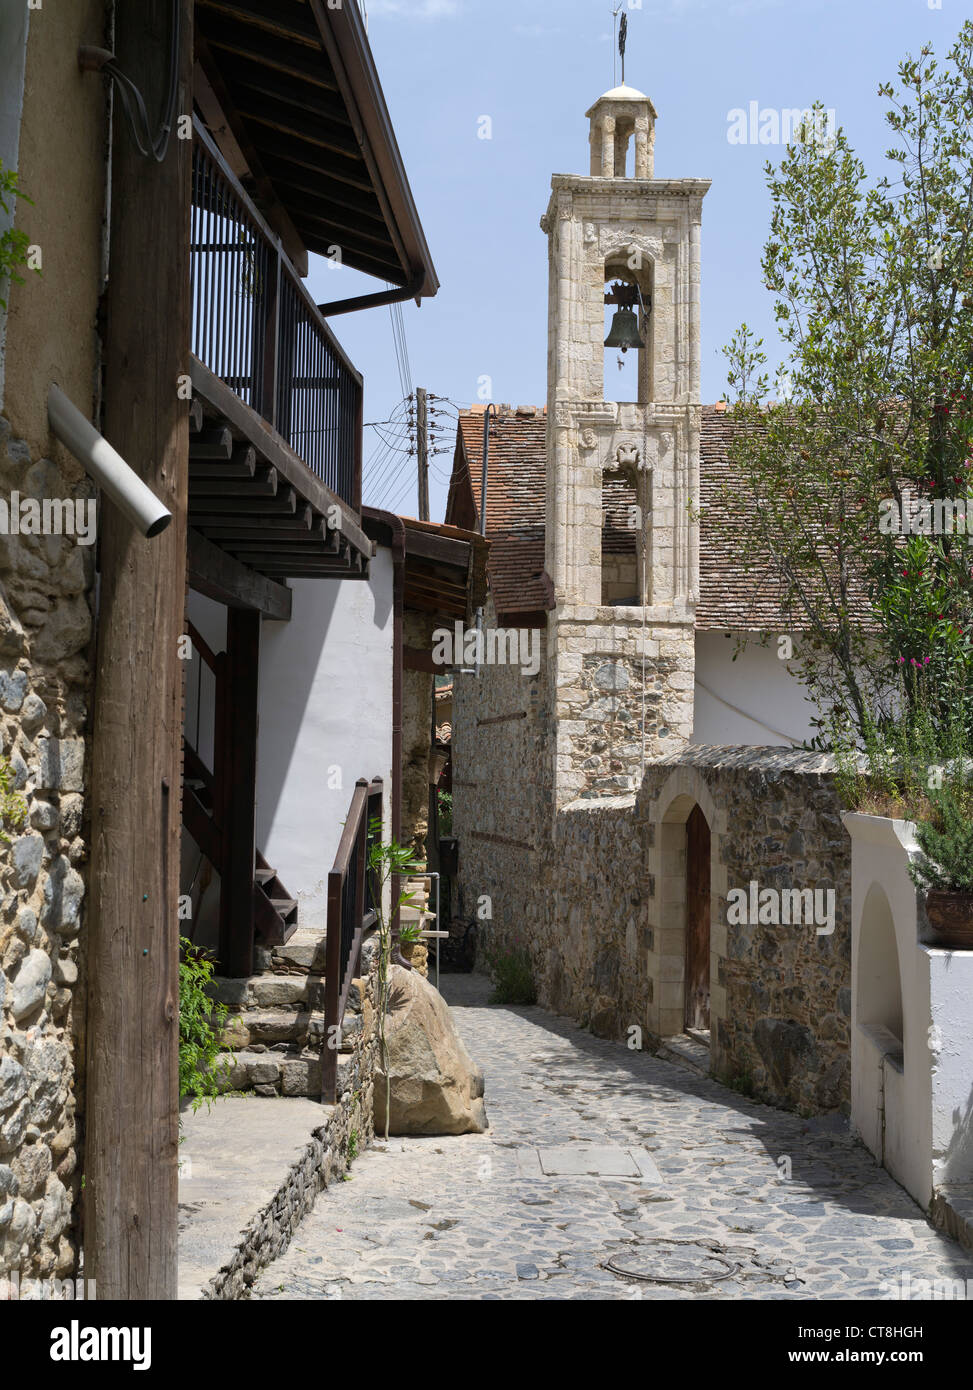 dh troodos village KAKOPETRIA CYPRUS Old Troodos mountain village church belfry bell tower street buildings orthodox Stock Photo